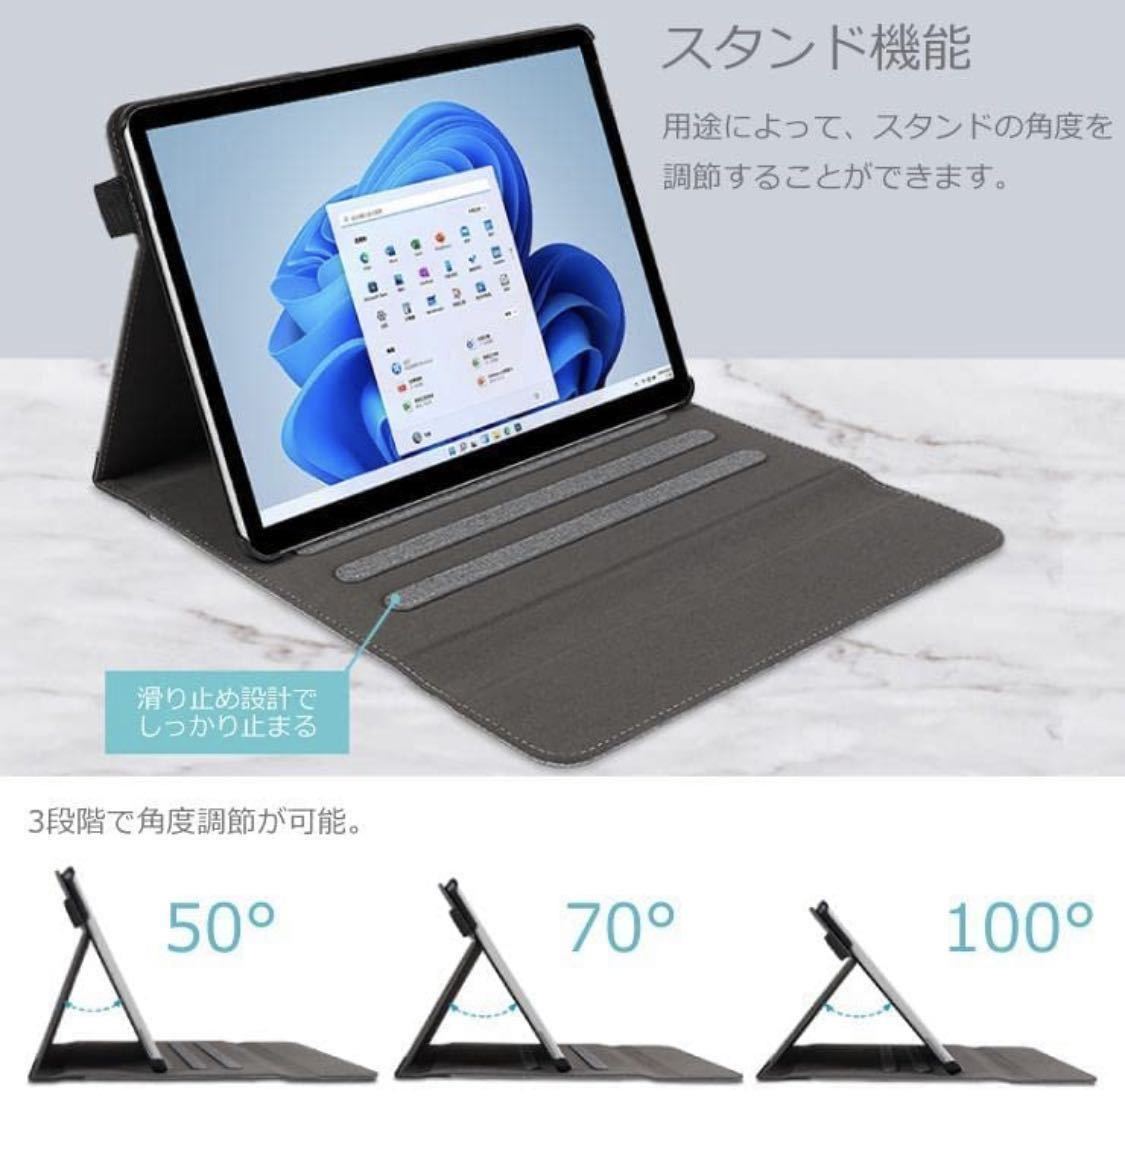  free shipping unused SurfacePro8 case notebook type pen holder keyboard attaching . storage possibility light weight thin type keyboard . compatibility equipped gray 